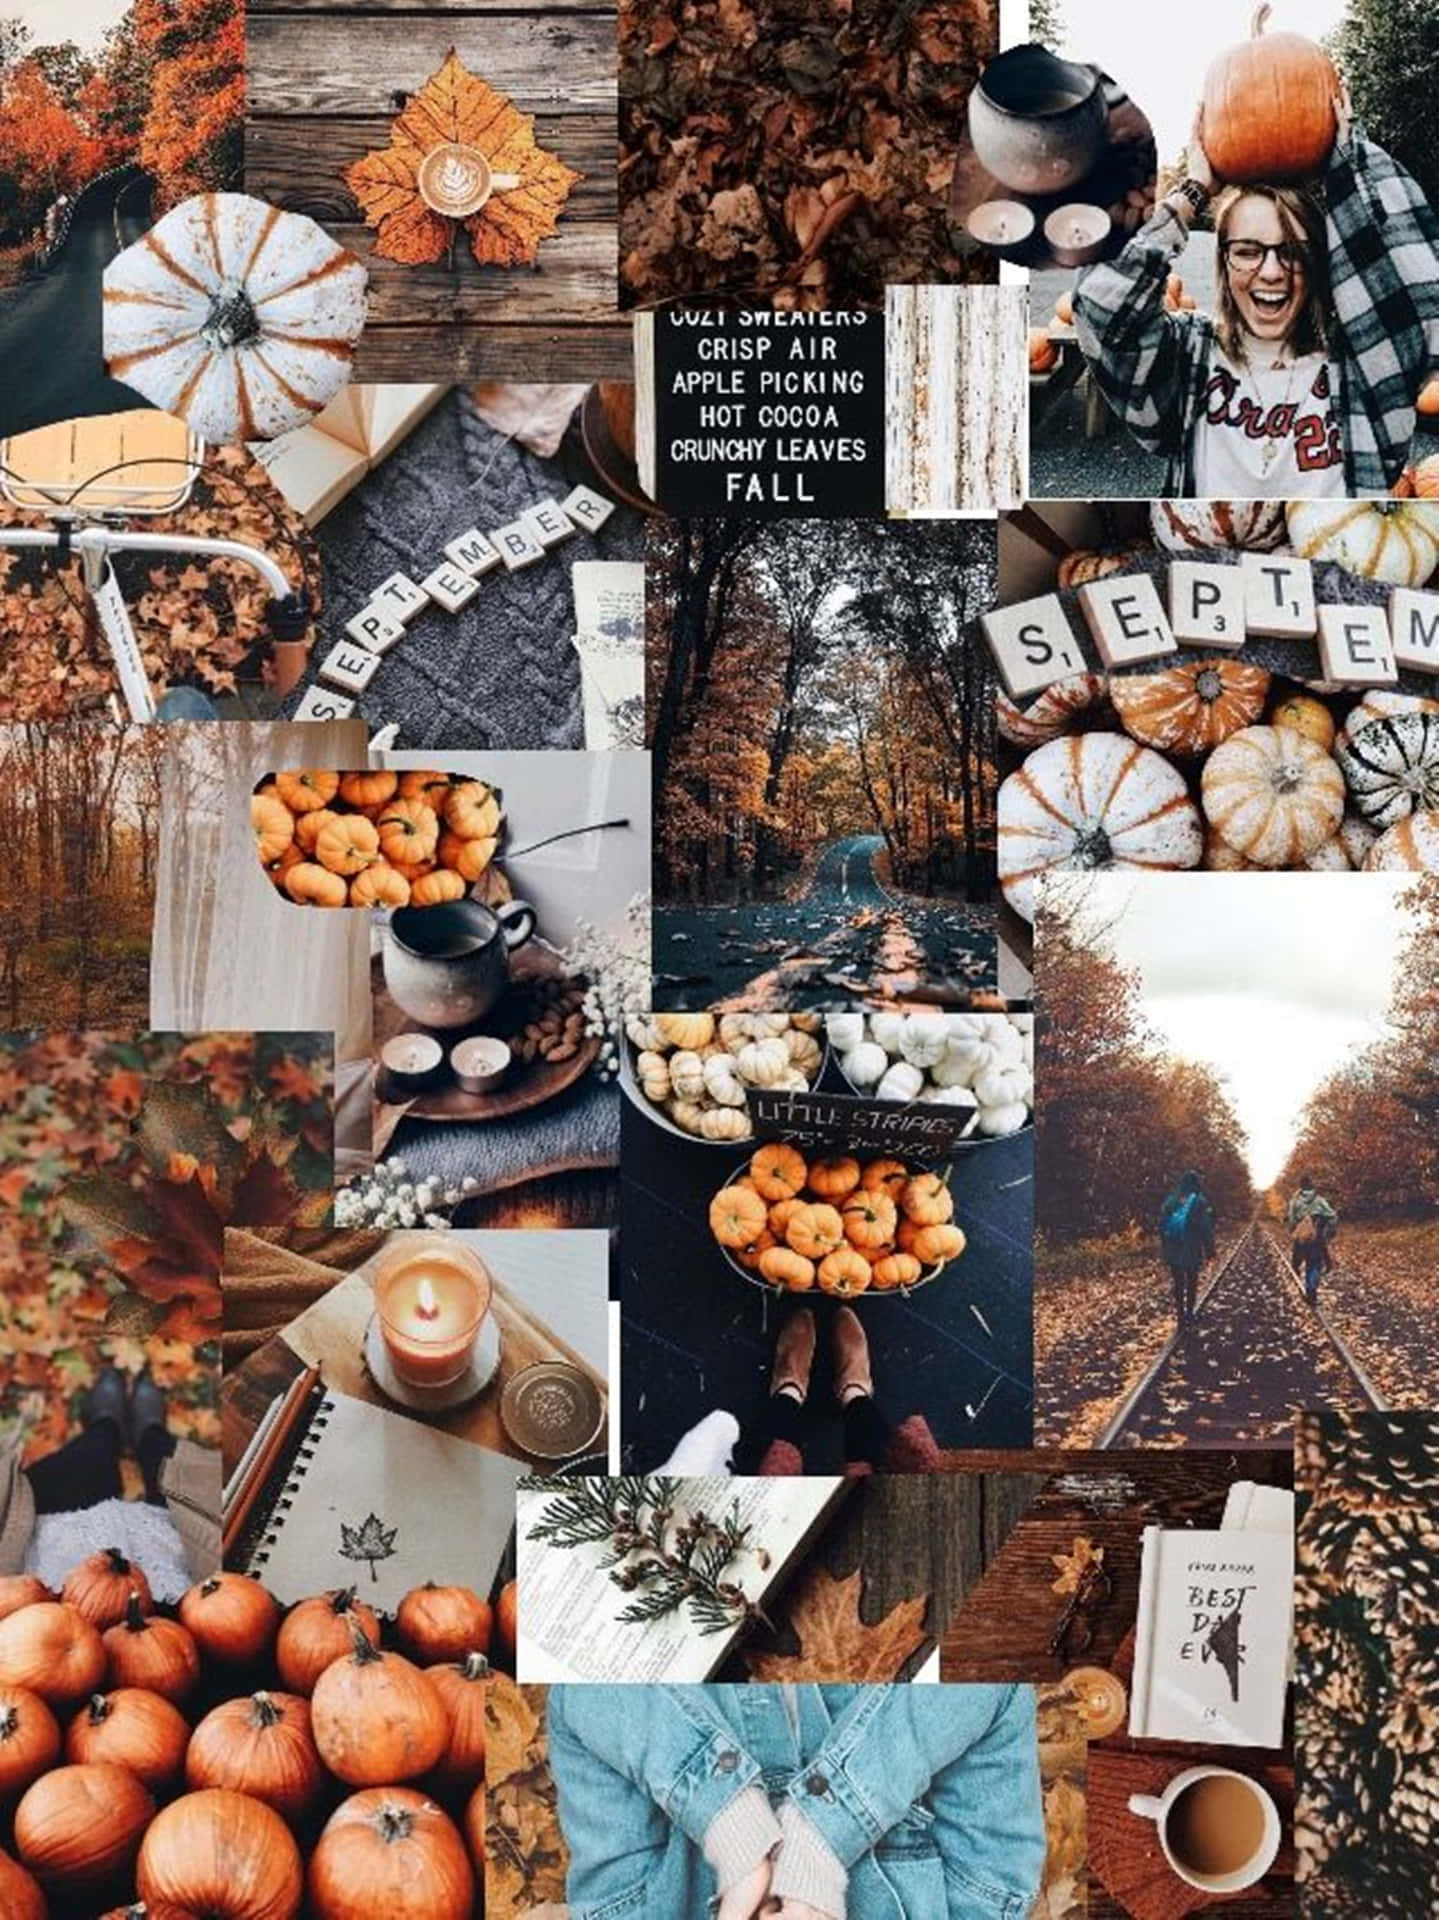 Take in the beauty of autumn with these four magical fall scenes! Wallpaper